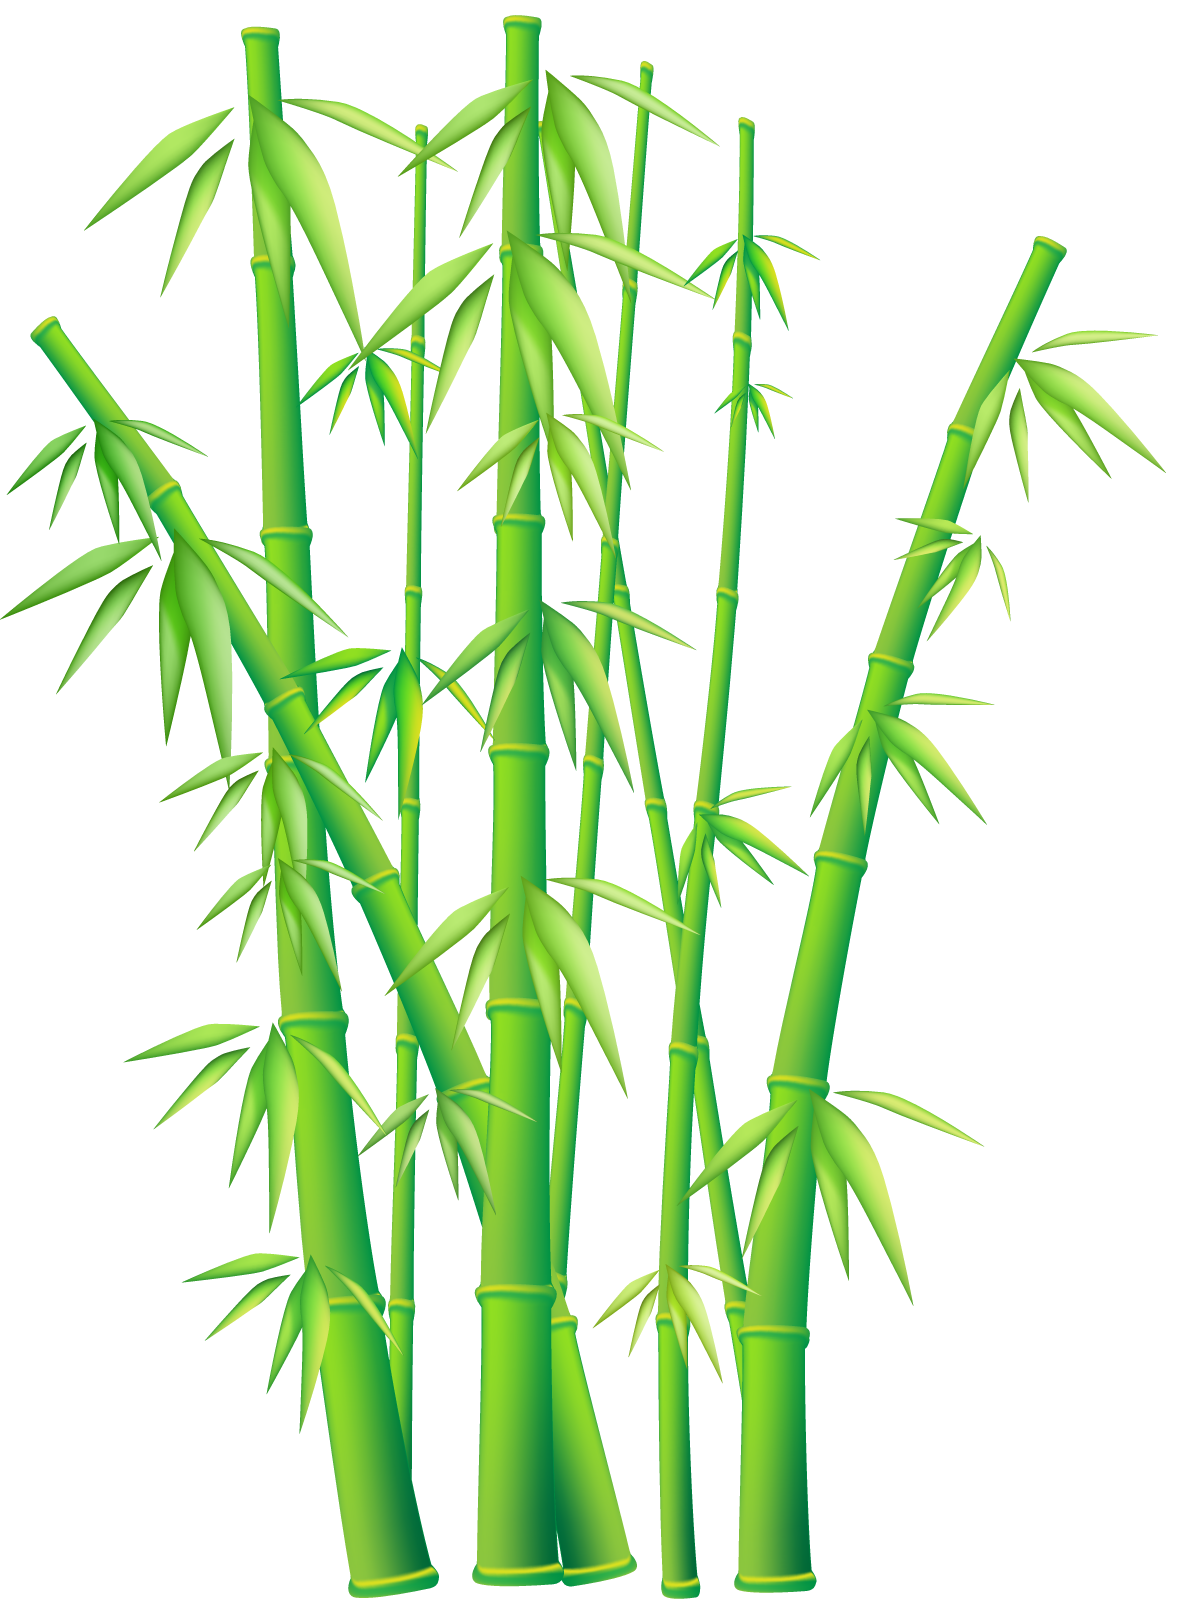 15 Bamboo Tree Png Free Cliparts That You Can Download To You Computer    